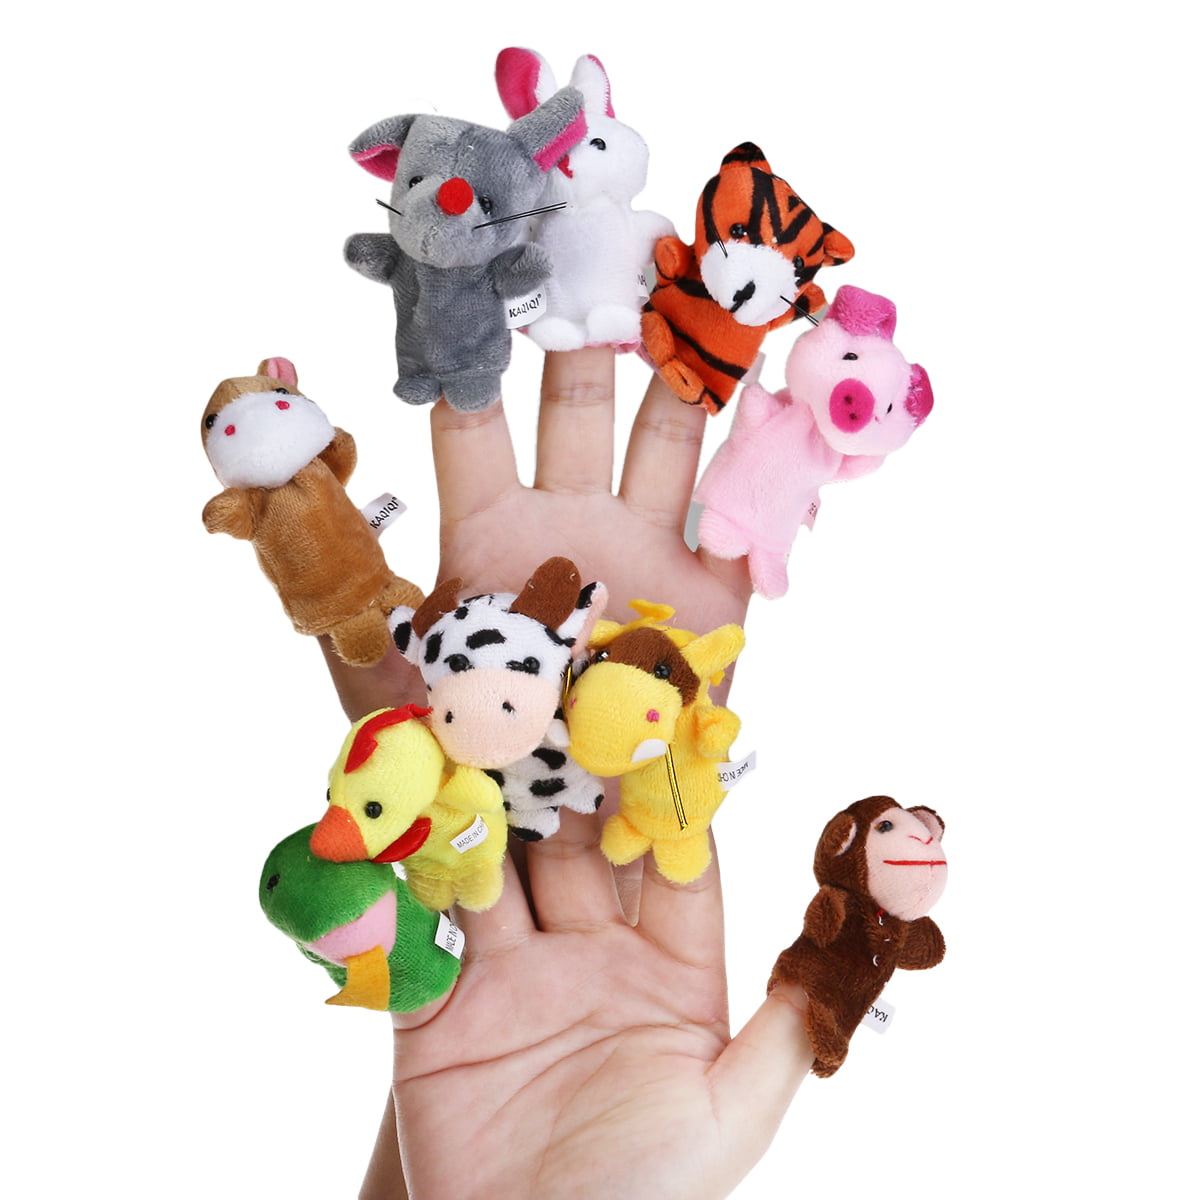 NUOBESTY Animal Finger Puppets Plush Finger Dolls Role Play Storytelling Game Props for Kids Children Story Time Playtime 5Pcs